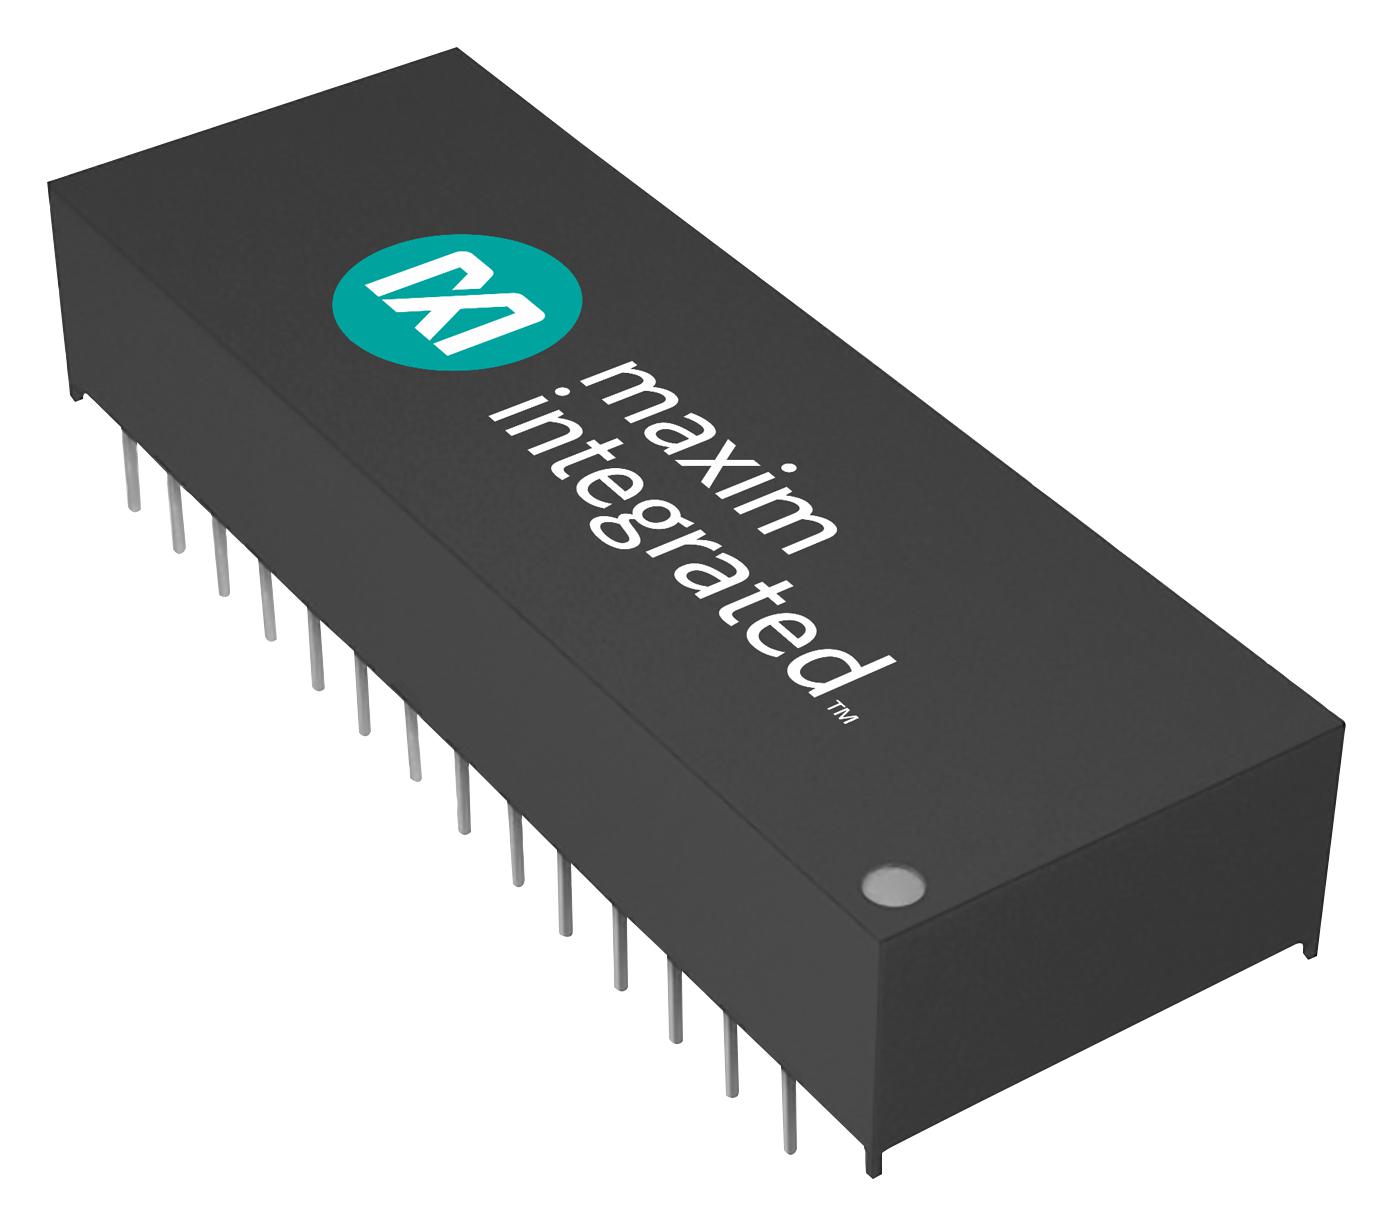 DS1230Y-120IND+ NON-VOLATILE SRAM, 256KBIT, 120NS, EDIP MAXIM INTEGRATED / ANALOG DEVICES